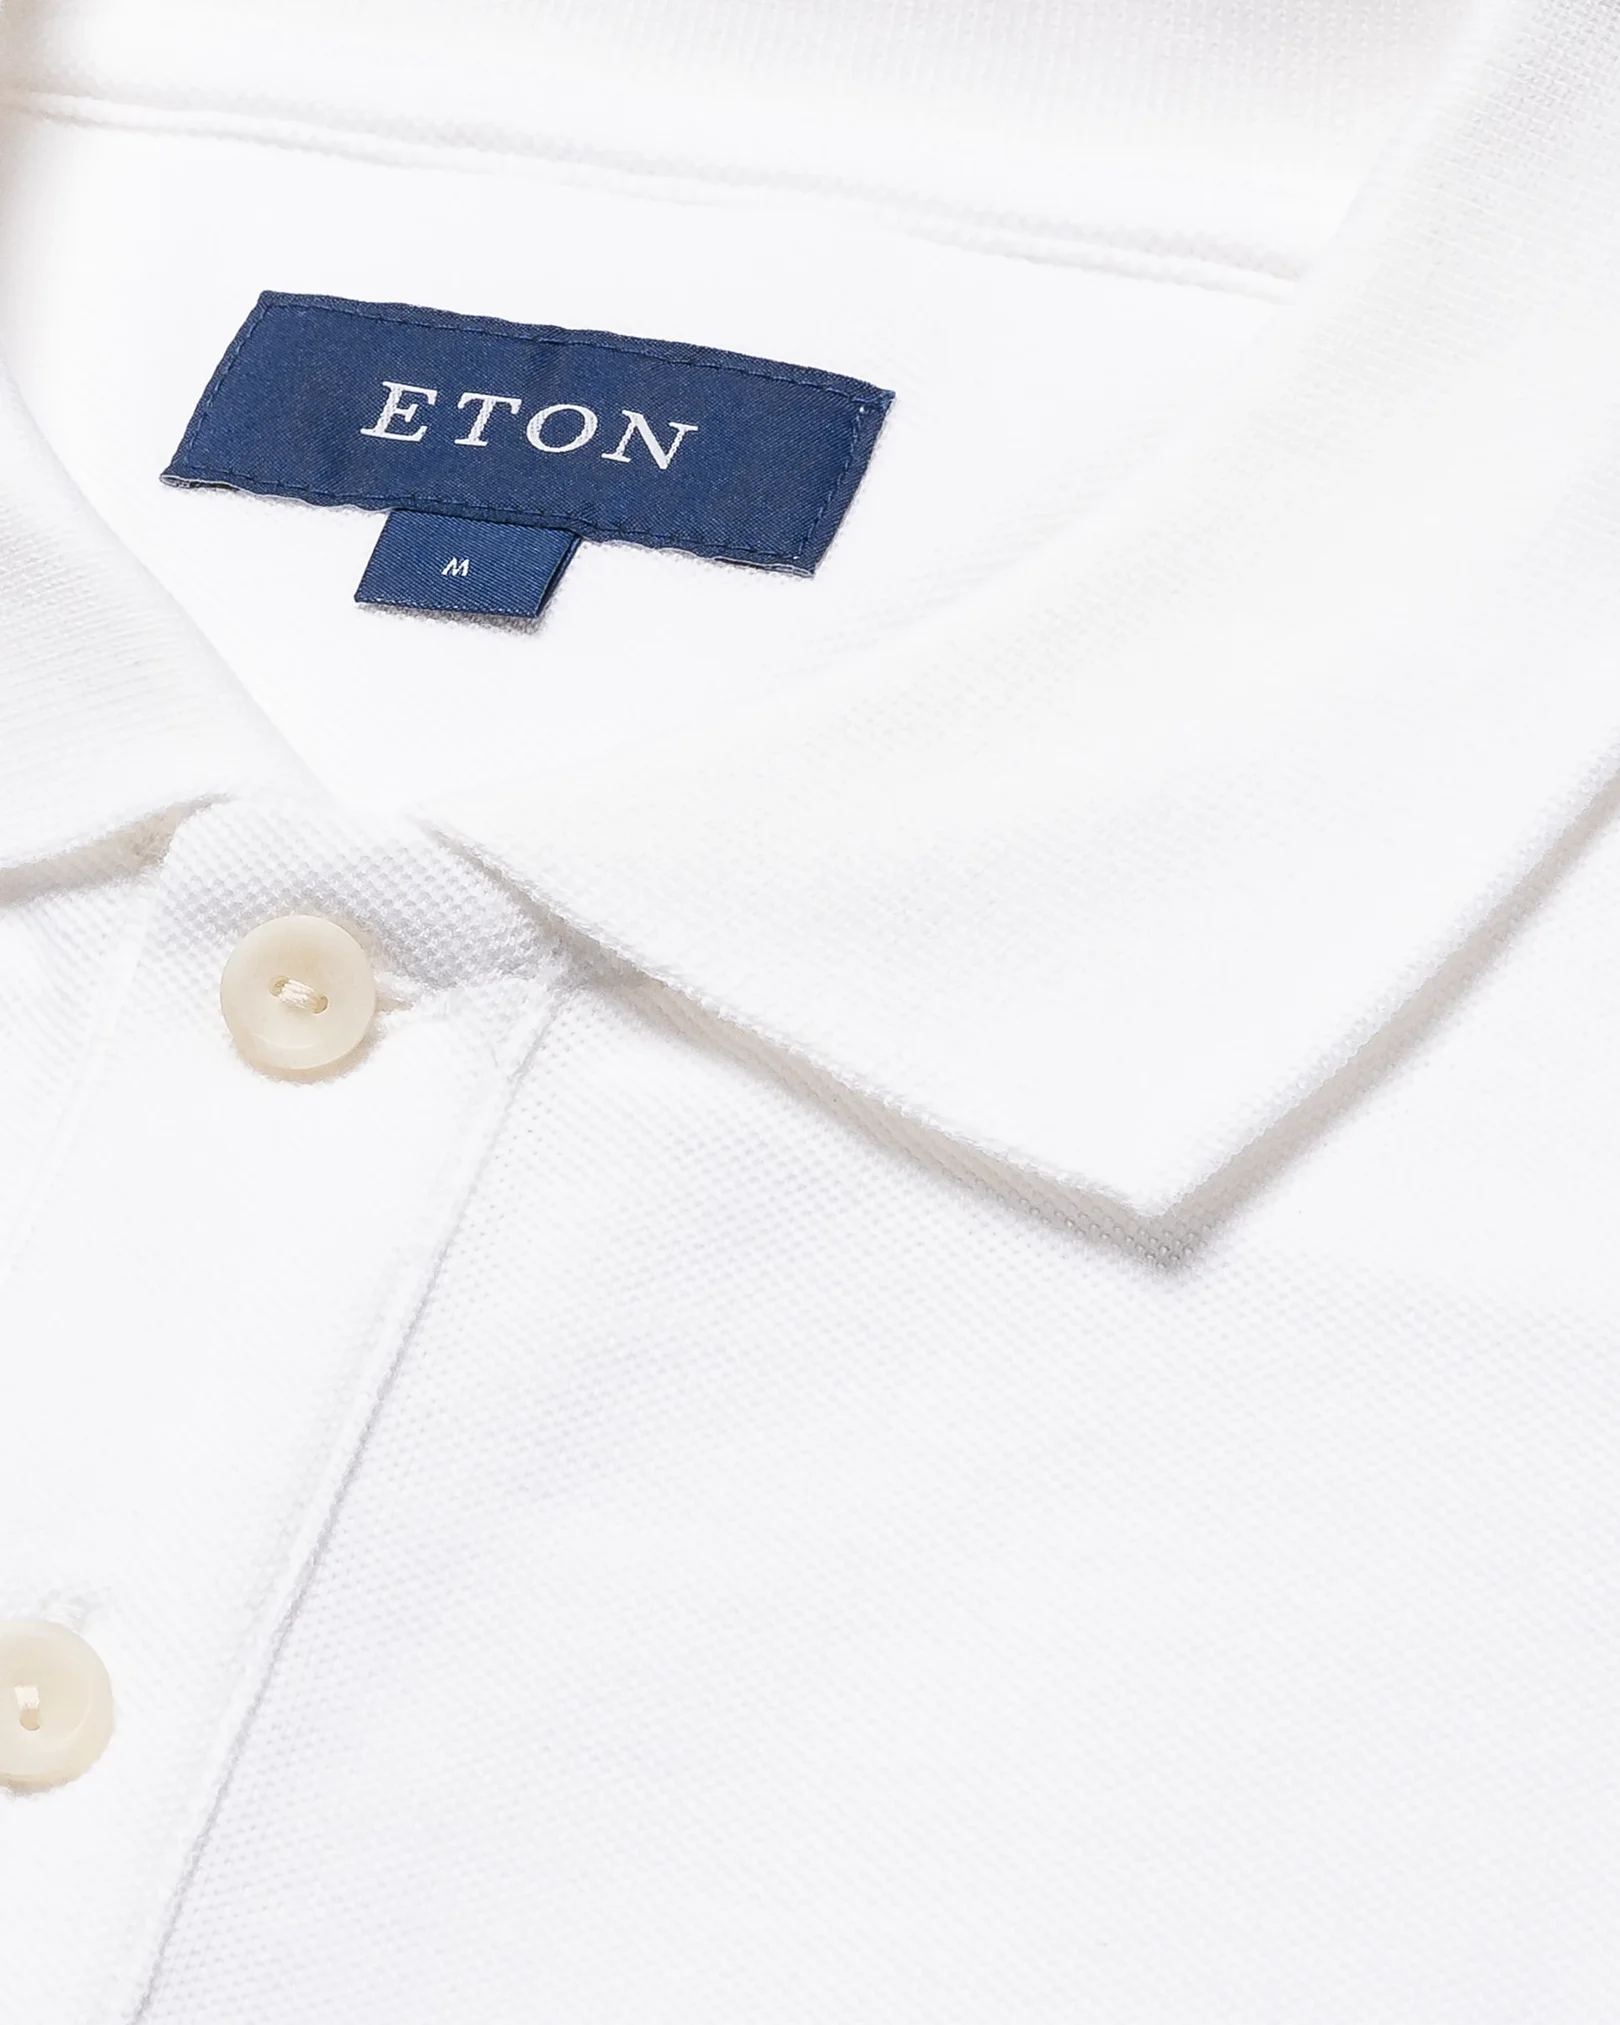 Eton - white knitted collar knitted cuff regular fit